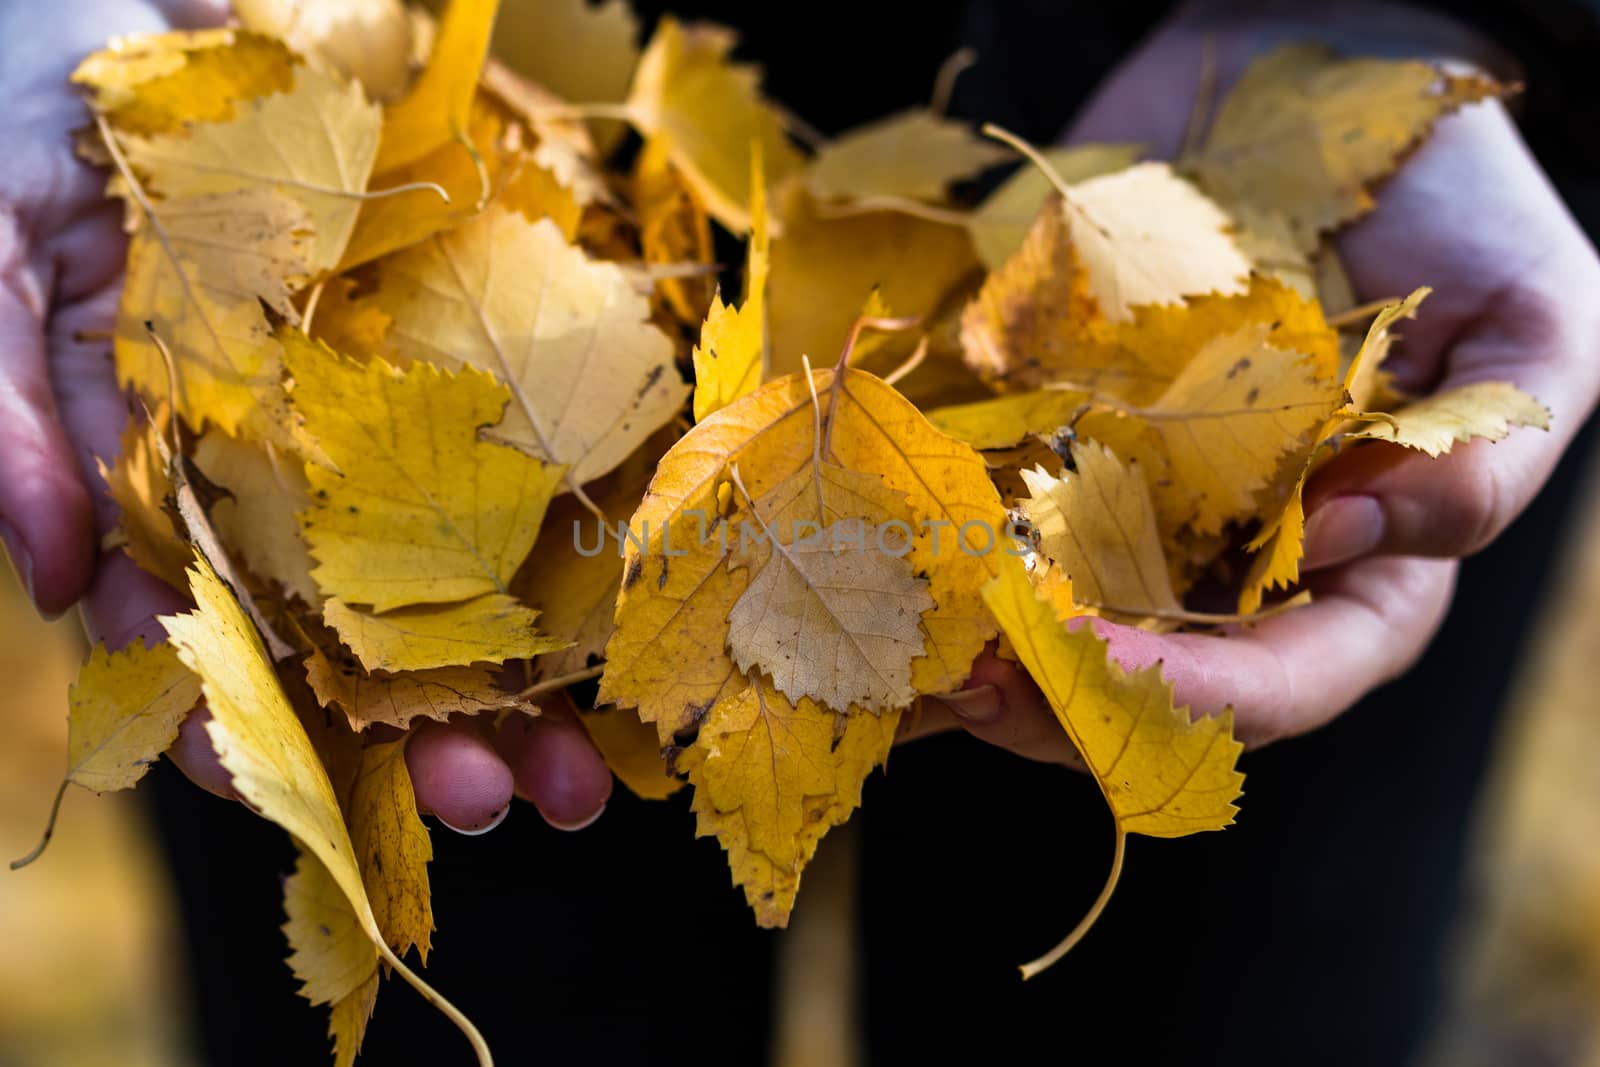 Hands holding fallen autumn orange leaves close up isolated.